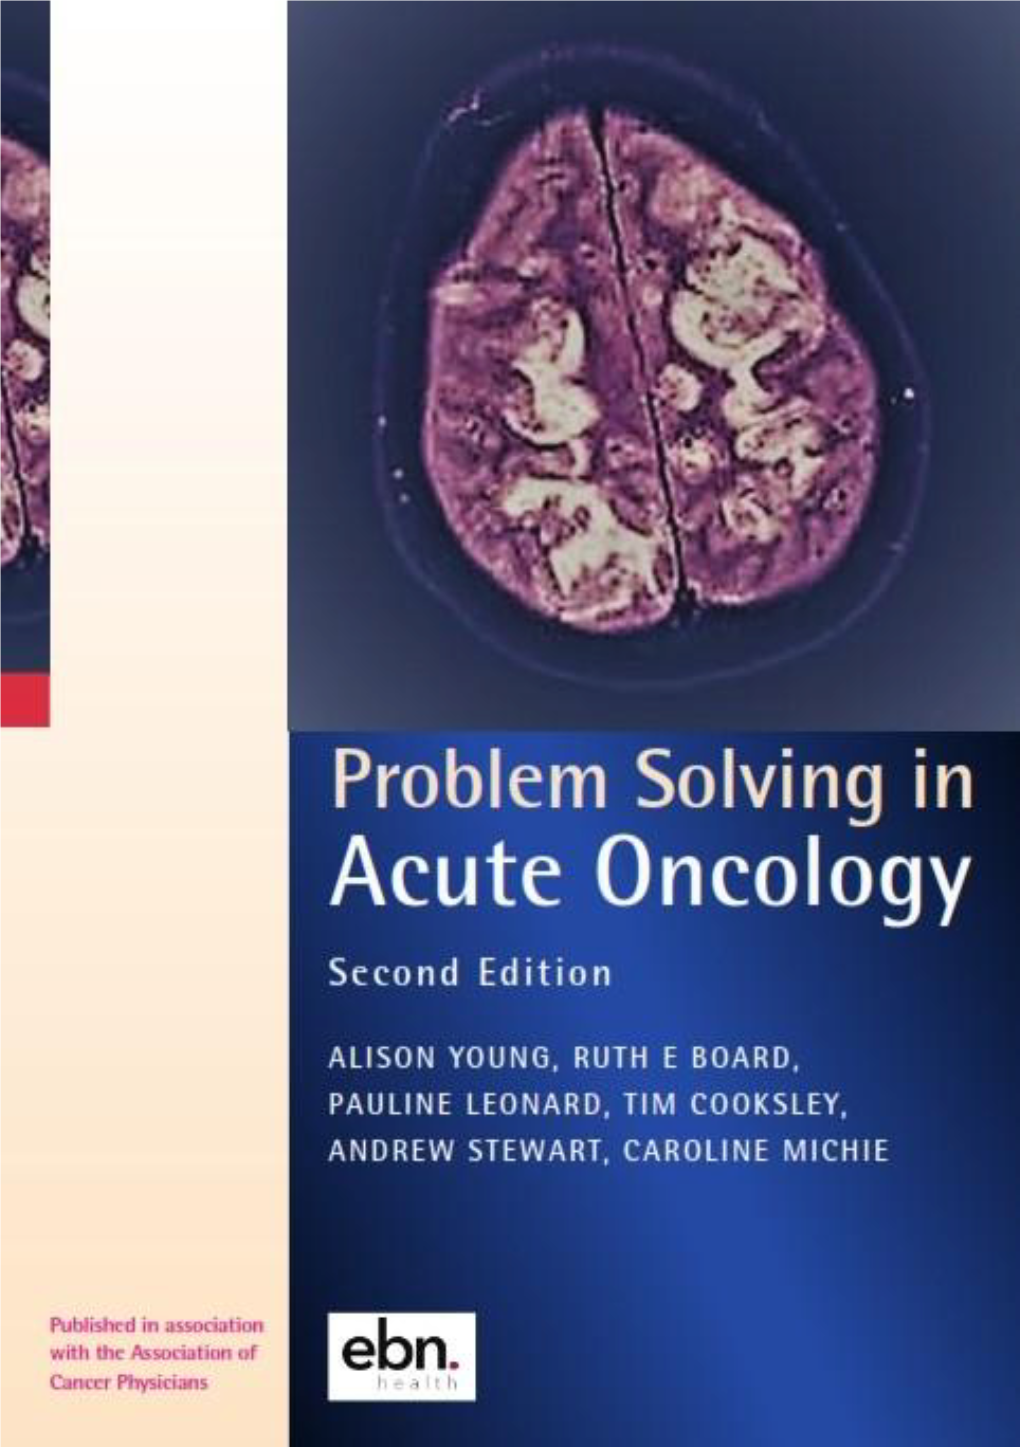 Problem Solving in Acute Oncology Second Edition